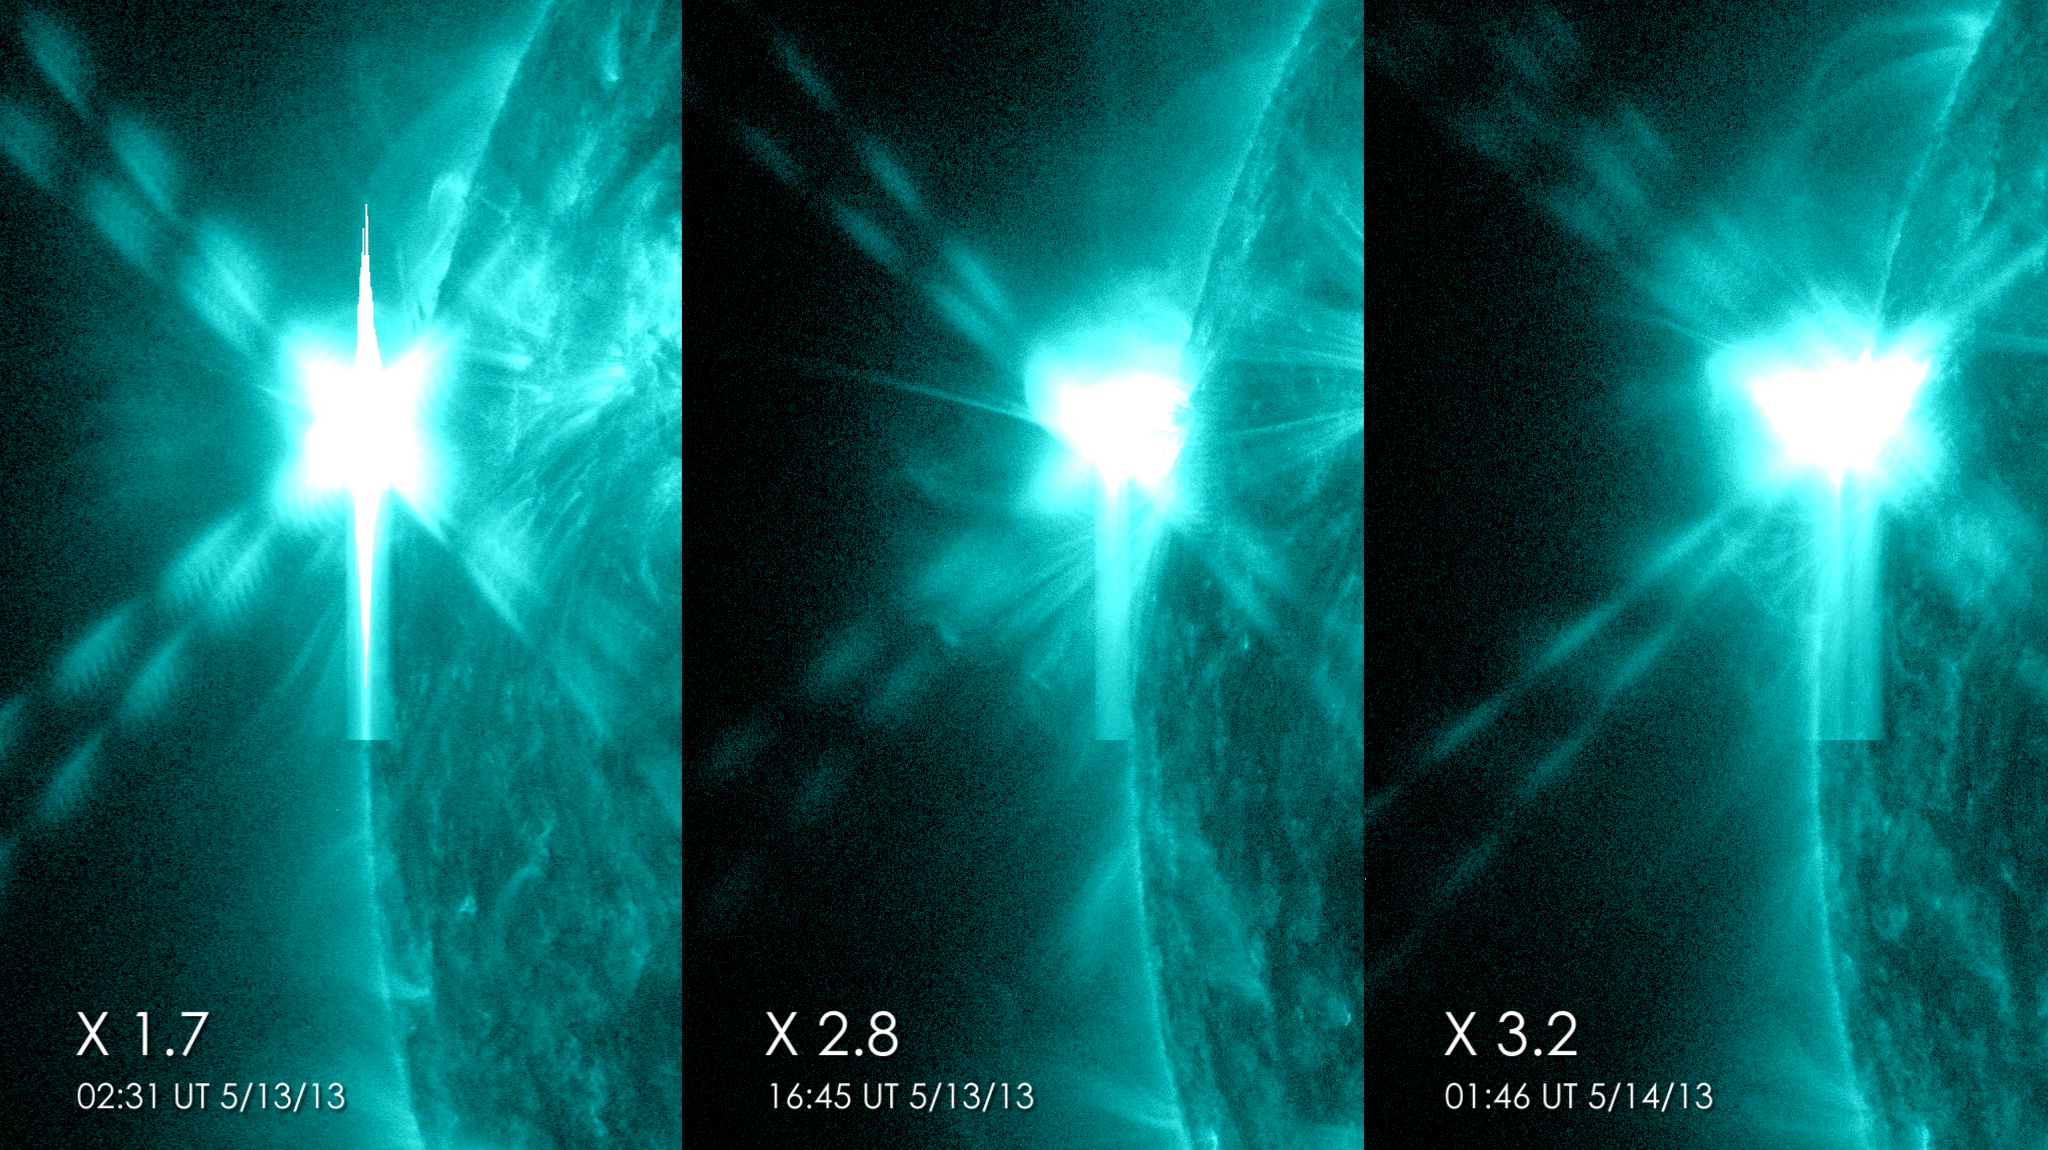 These pictures from NASA's Solar Dynamics Observatory show the three X-class flares that the sun emitted in under 24 hours on May 12-13, 2013.